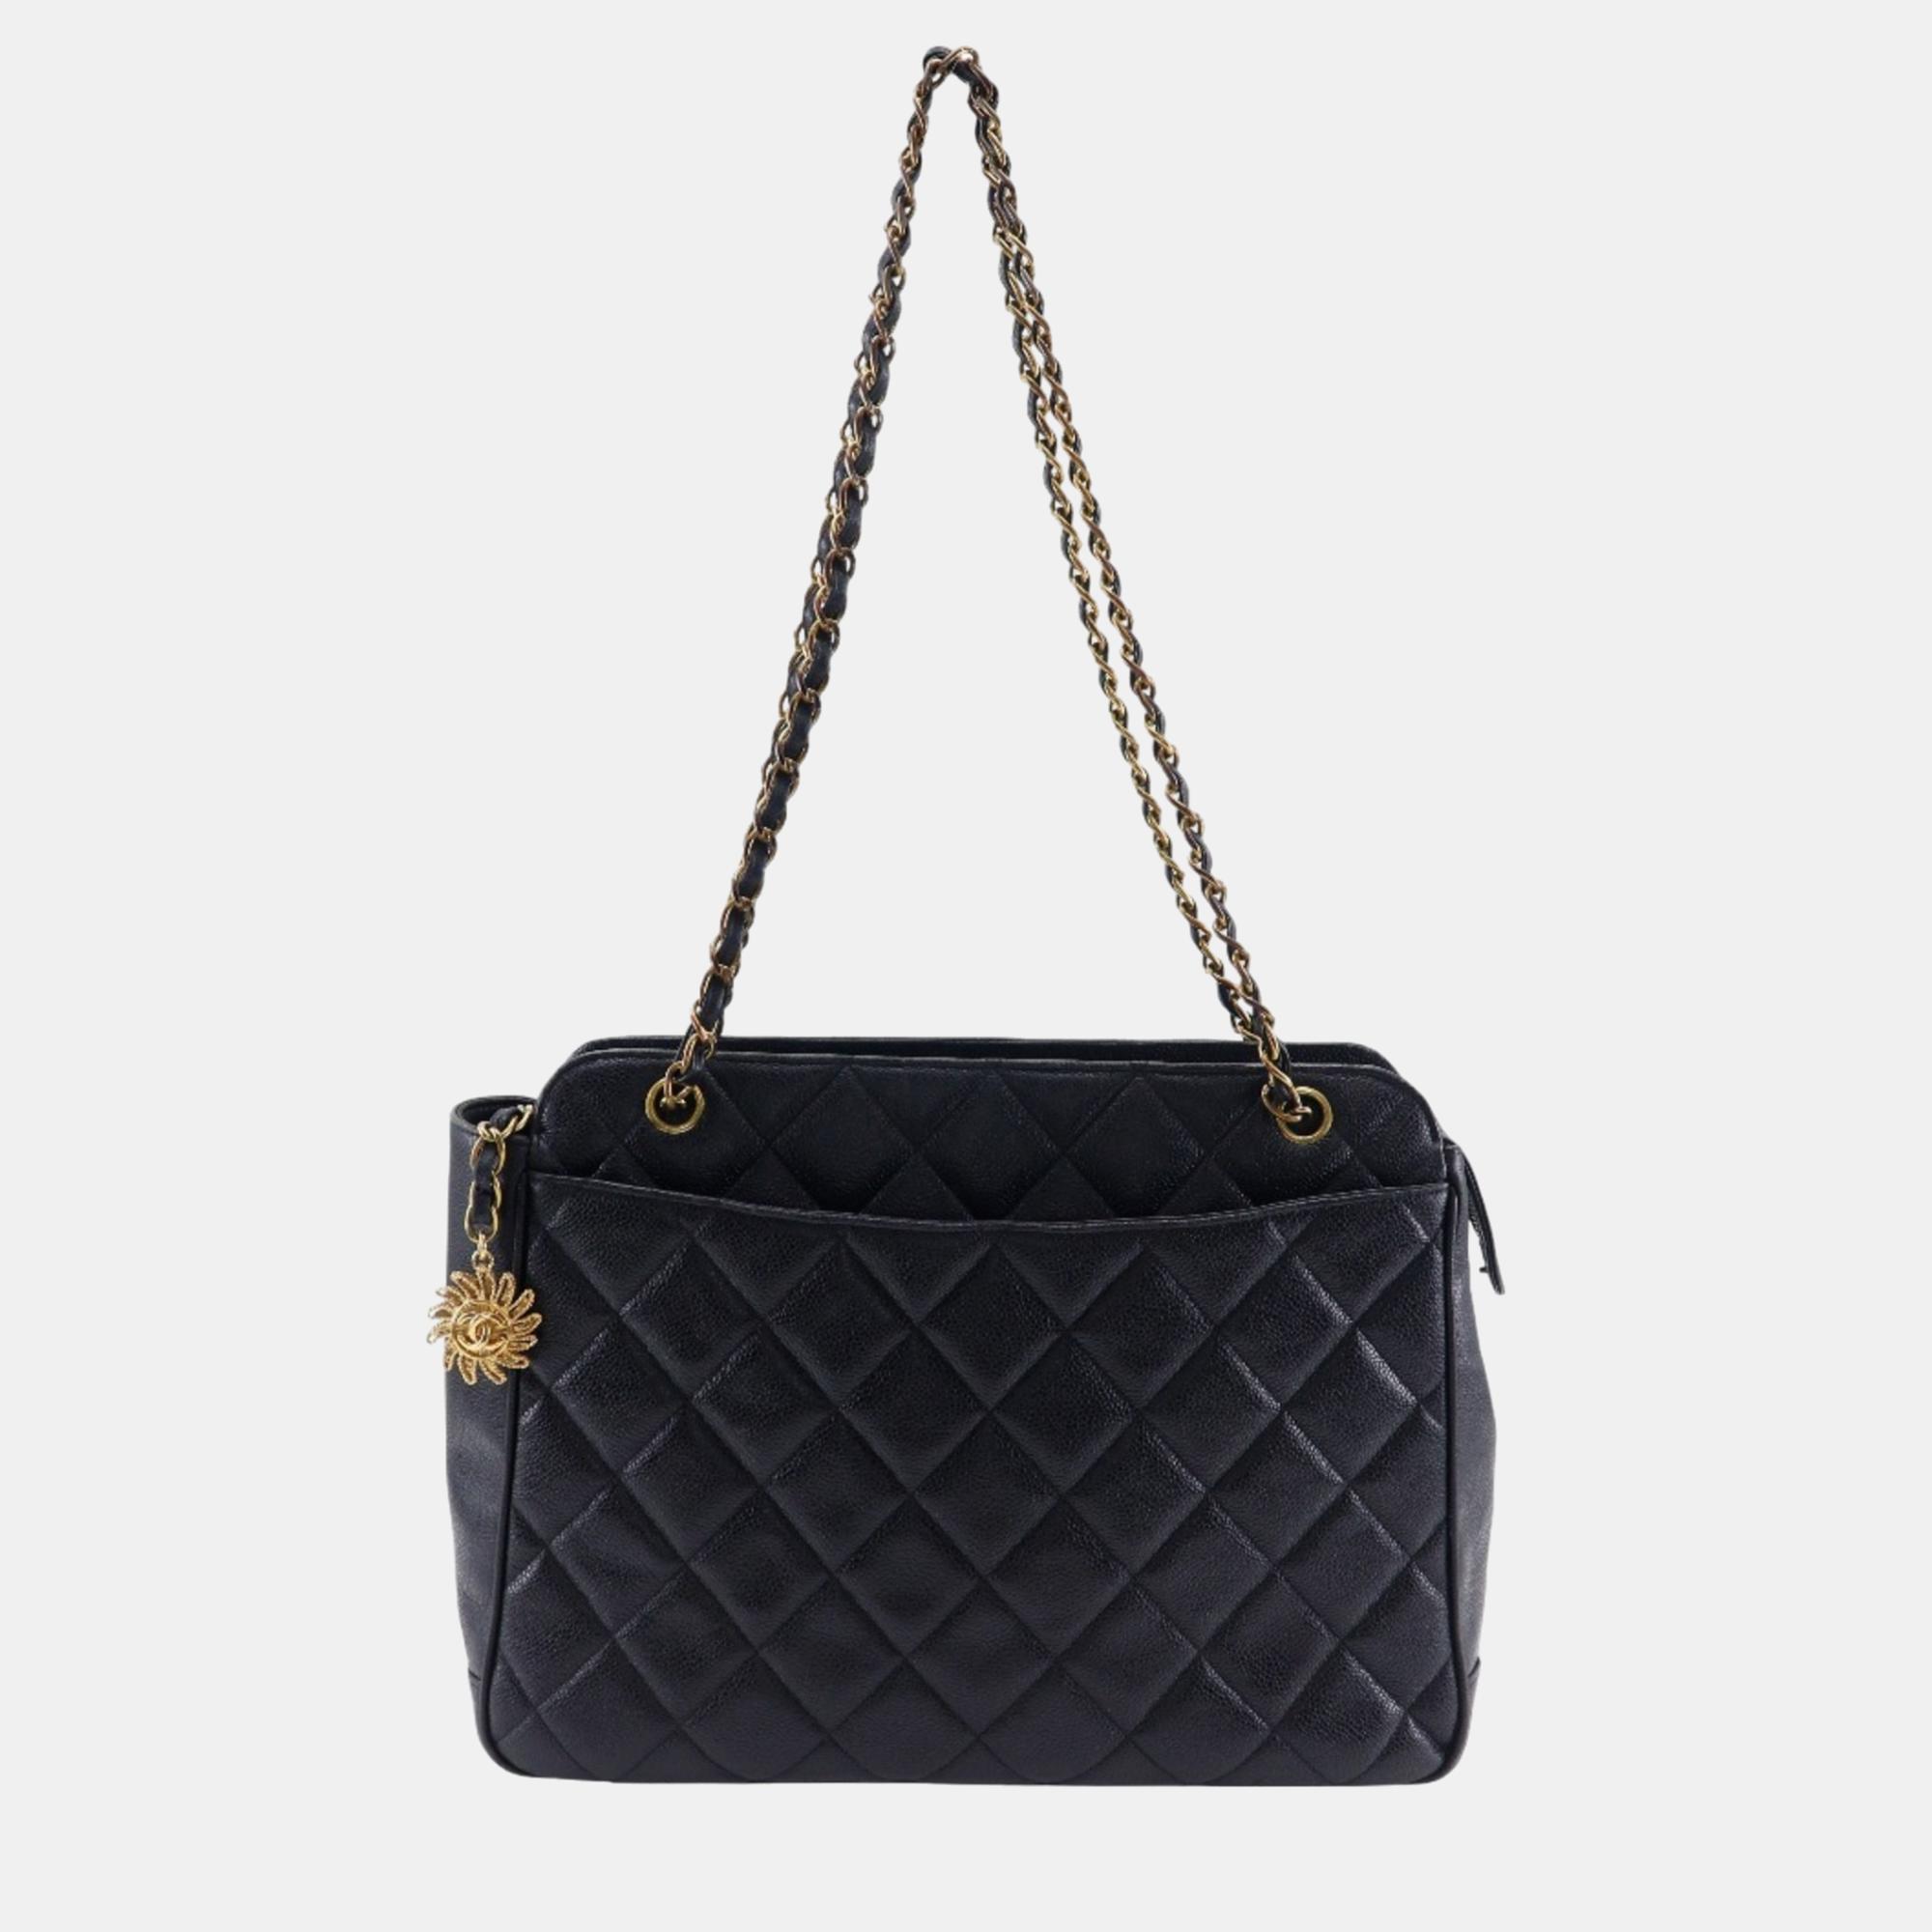 

Chanel Black Caviar Leather Quilted Chain Shoulder Bag